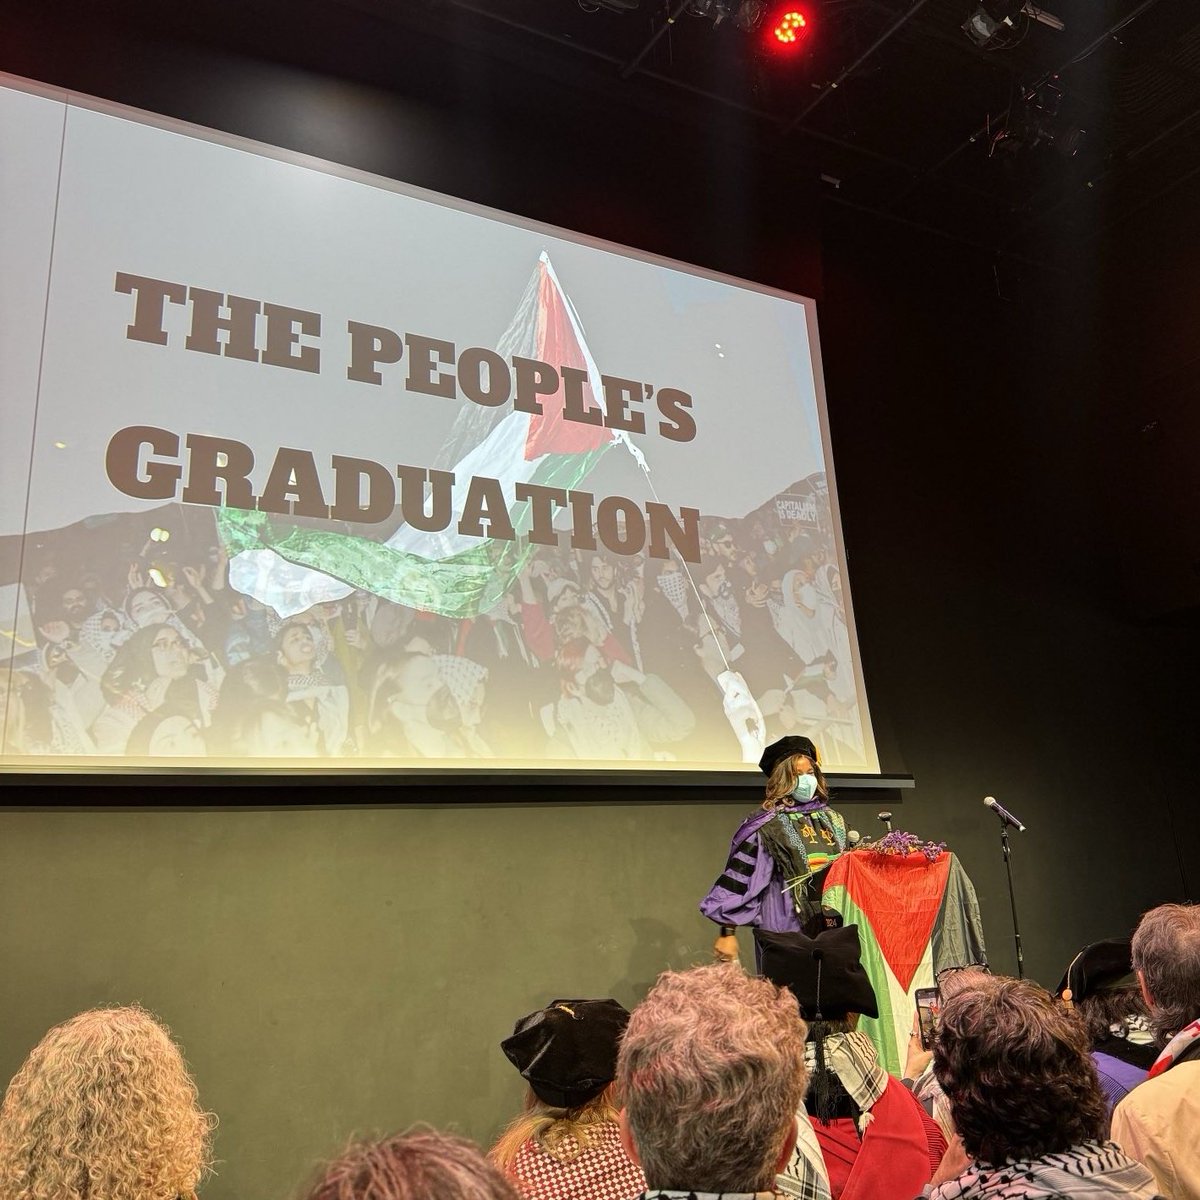 this nakba day I spoke at the peoples graduation about arcs and bends. now is the time to find your role in bending the arc of this moral universe toward justice. struggle together, stay dangerous, and do not stop until liberation. may we see a free Palestine within our lifetime